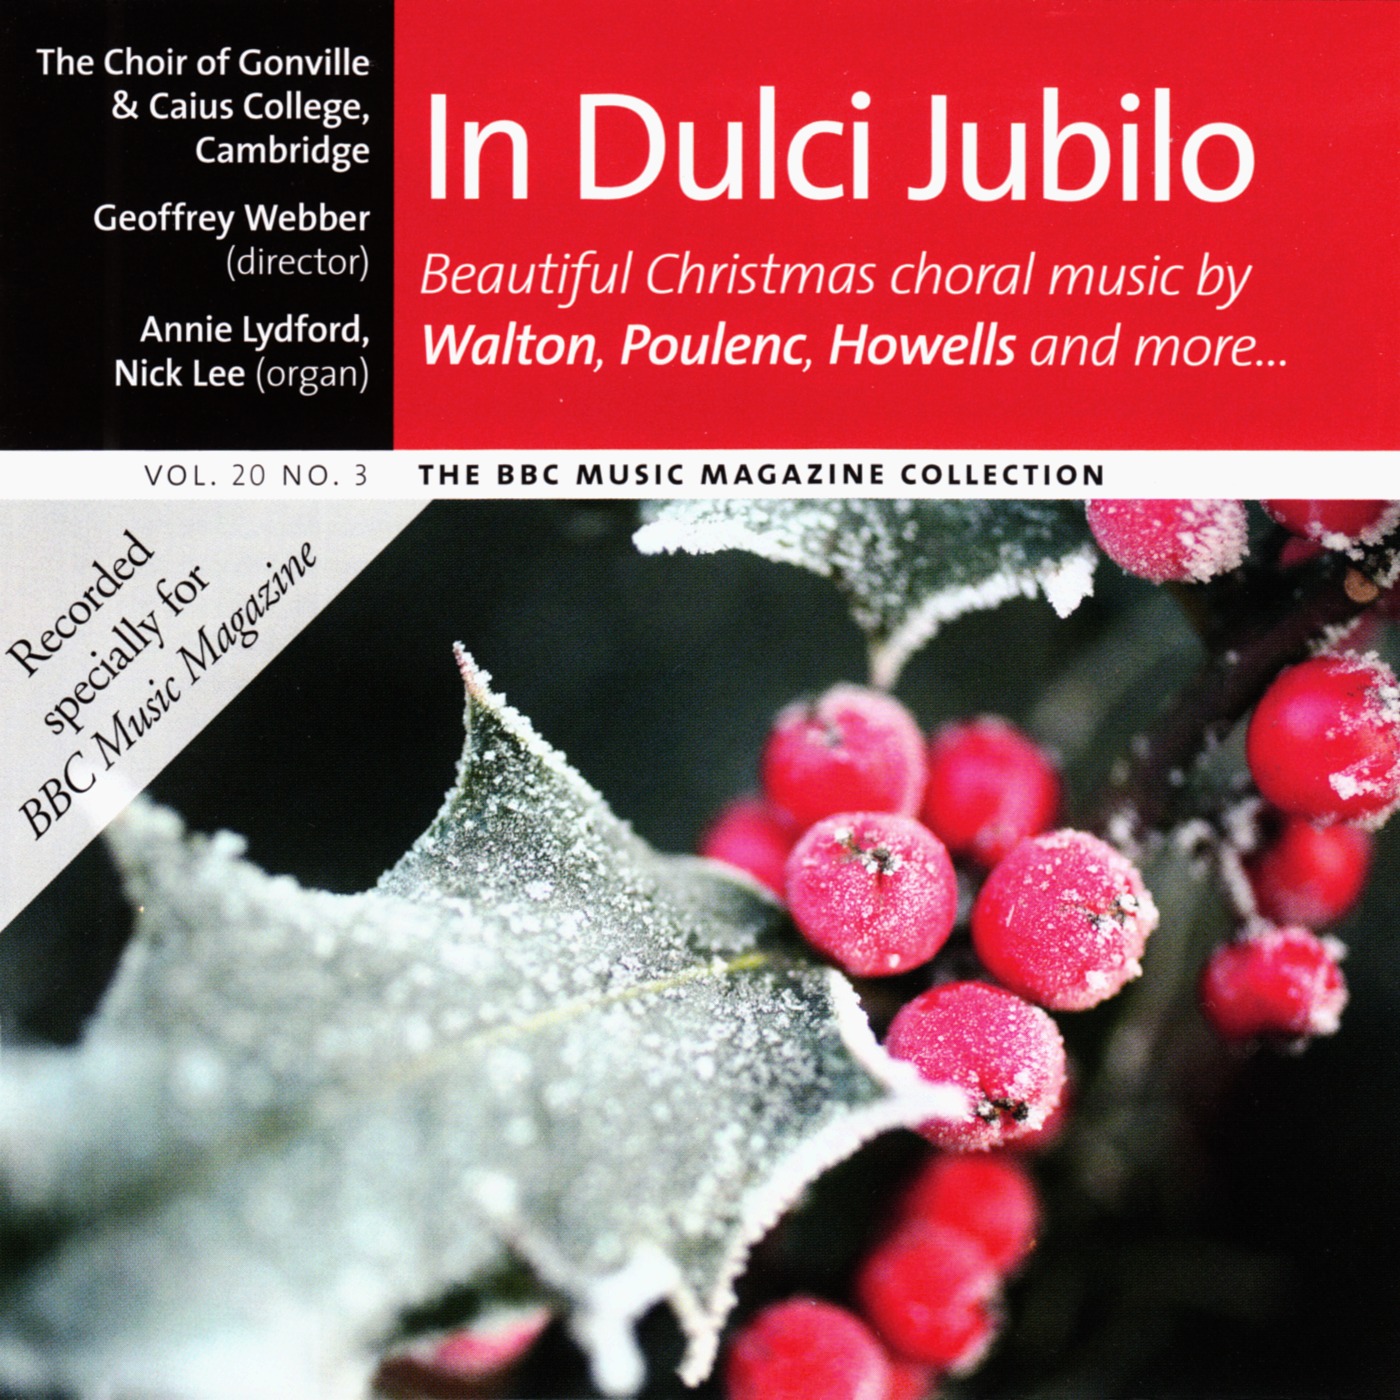 In dulci jubilo Beautiful Christmas choral music by Walton Poulenc Howells and more